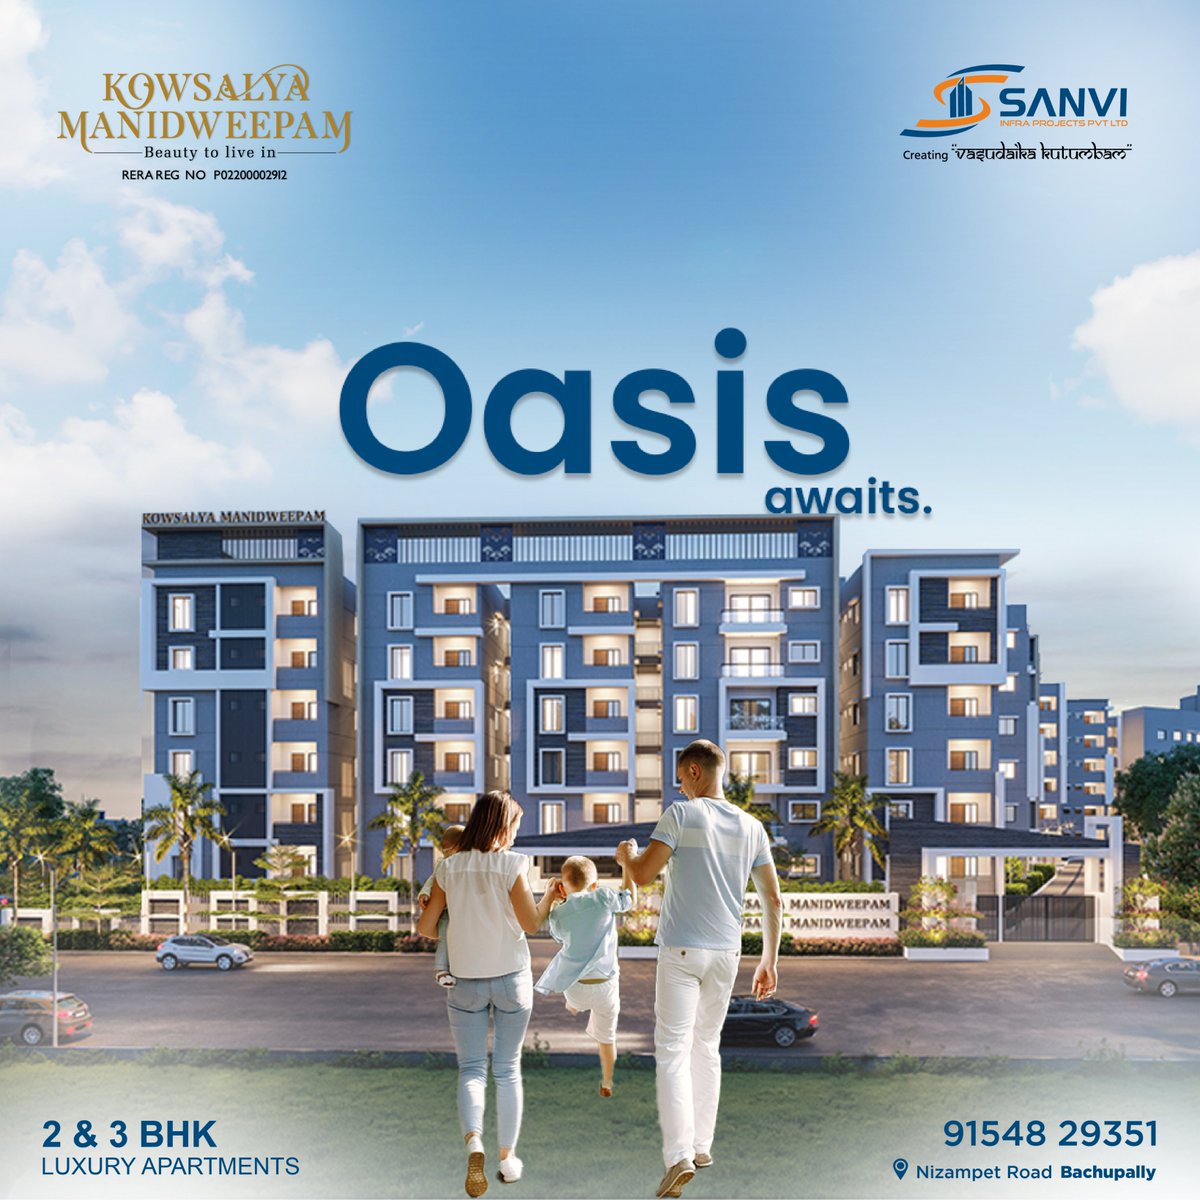 Our apartments are so luxurious, they will feel like a summer oasis giving the comfort you seek.
#sanviinfra #kowsalyamanidweepam #Nizampet #Bachupally #home #property #2and3bhkflats #2and3BHKApartments #2BHKApartments #3bhkapartments #luxuryapartments #ApartmentStyle